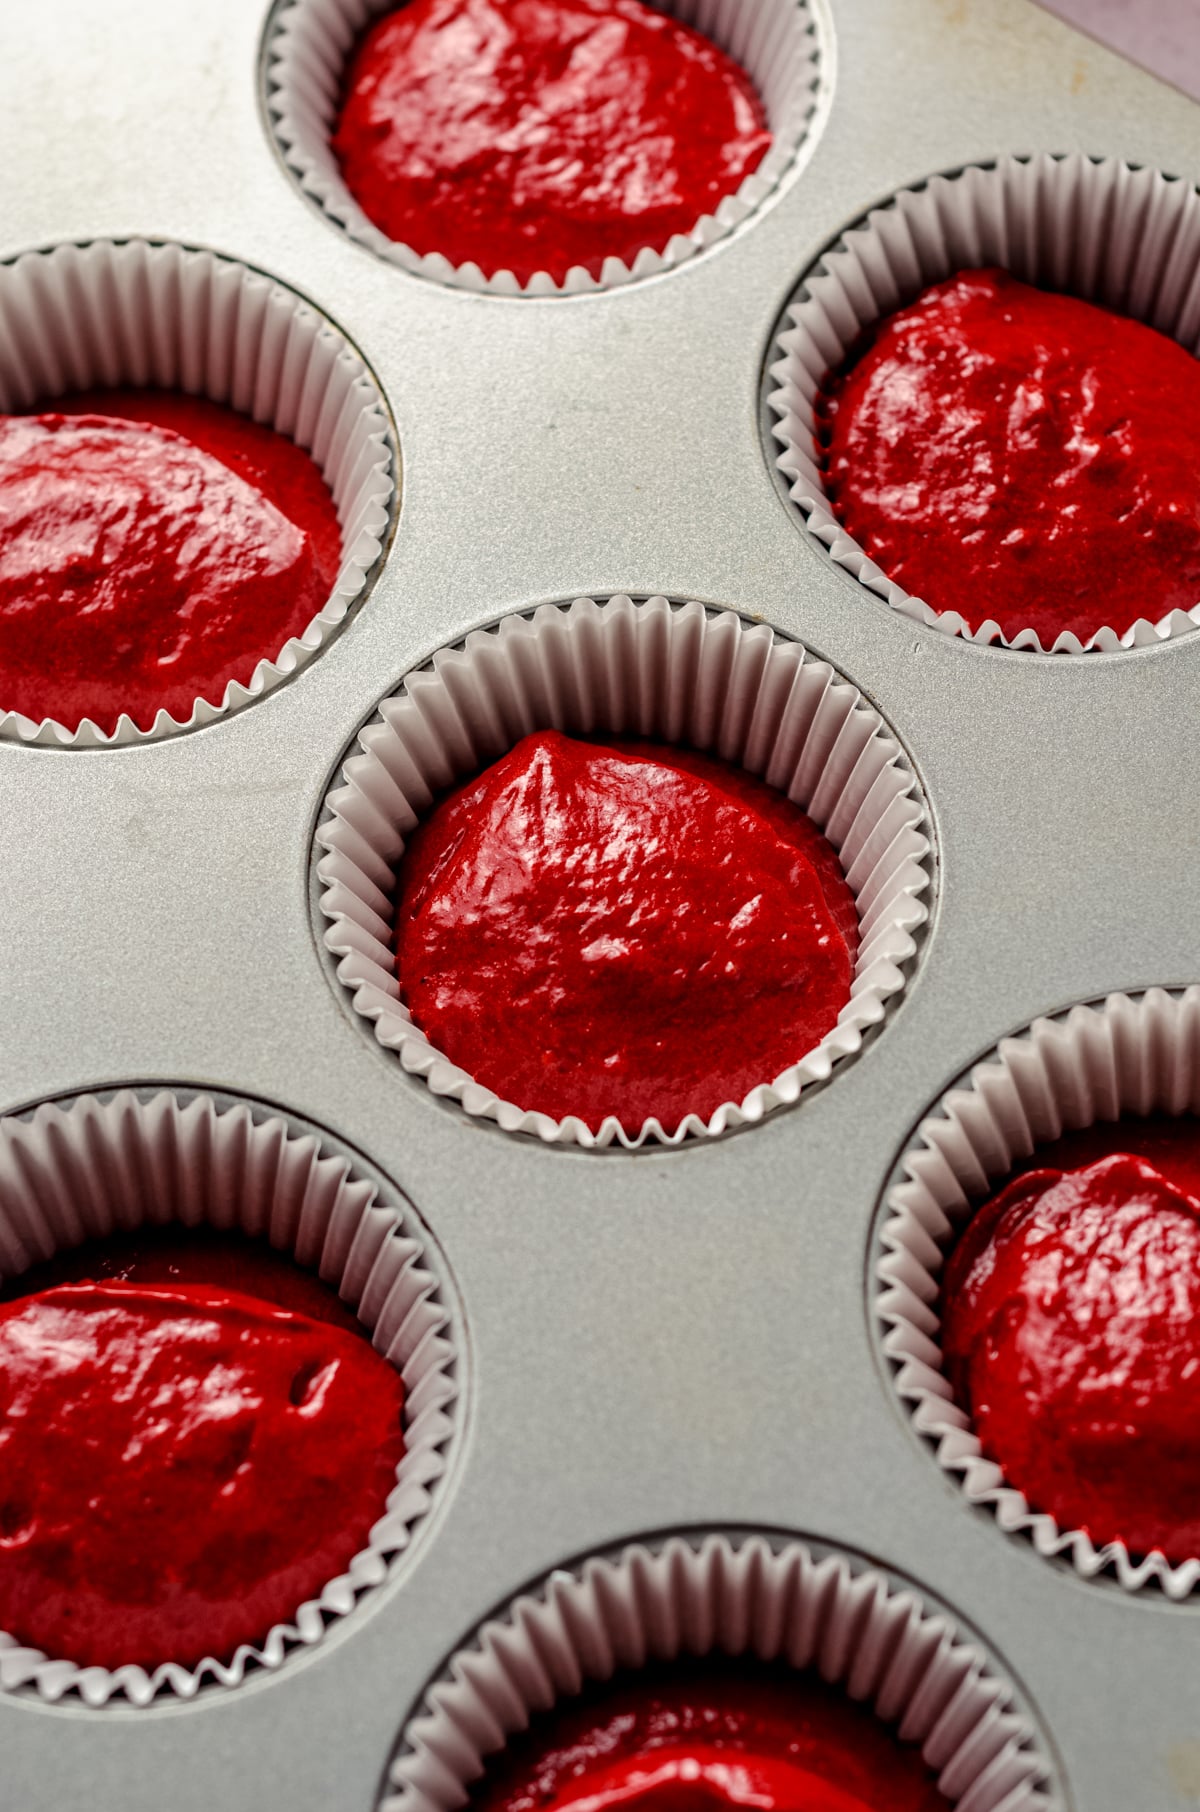 Red velvet cupcake batter in cupcake liners ready to be baked.